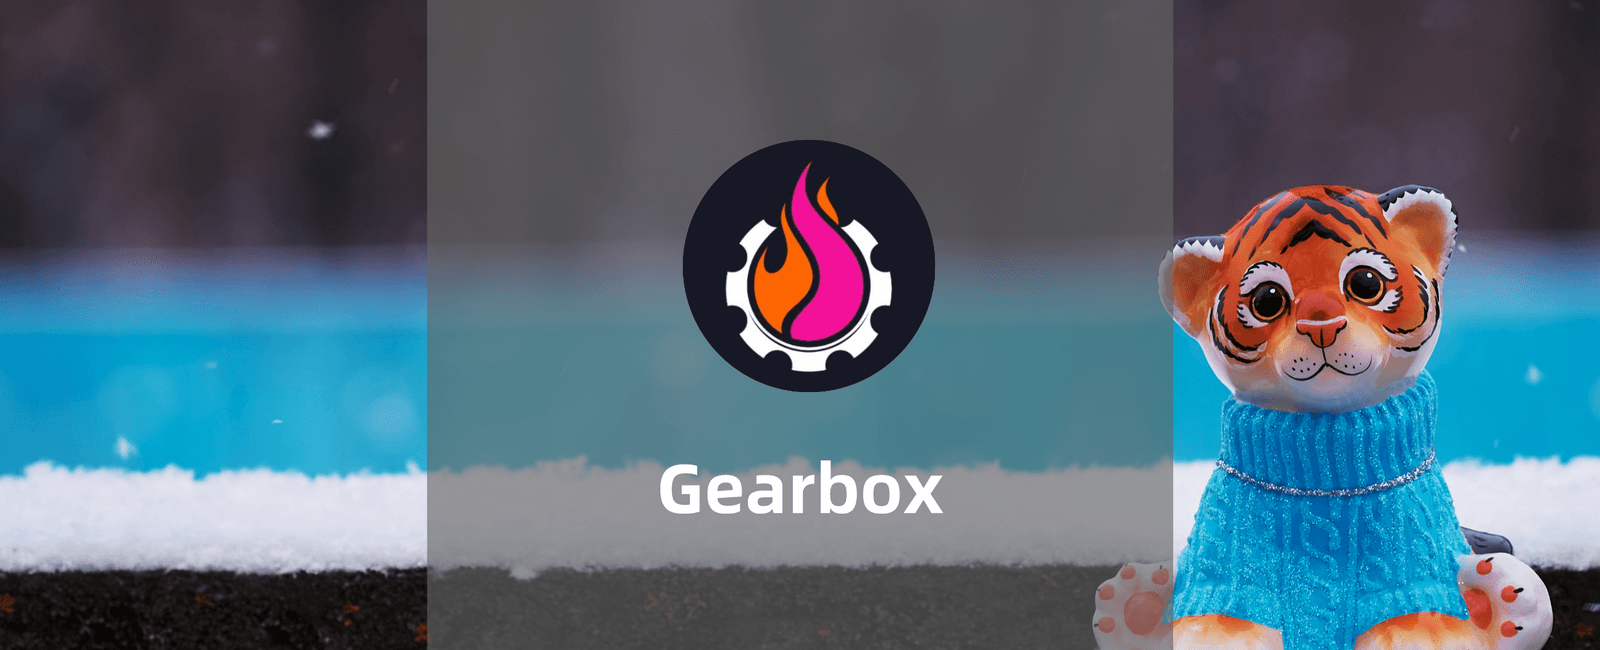 Gearbox-可释放保证金的杠杆协议